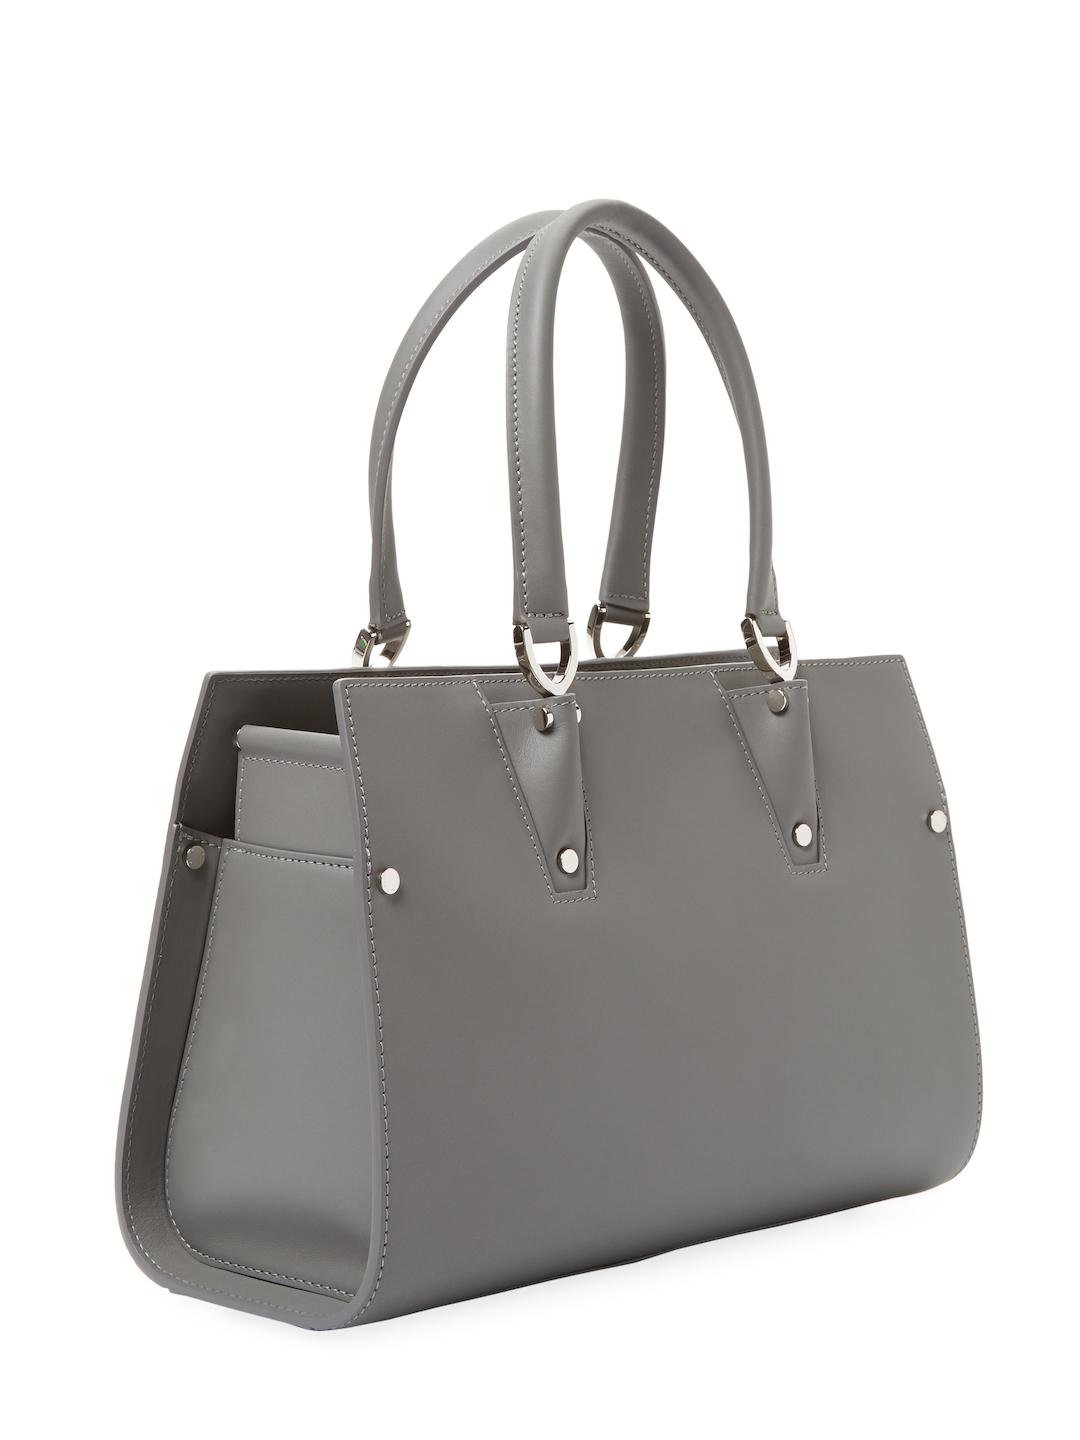 Longchamp Paris Premier Small Leather Tote Bag in Gray | Lyst